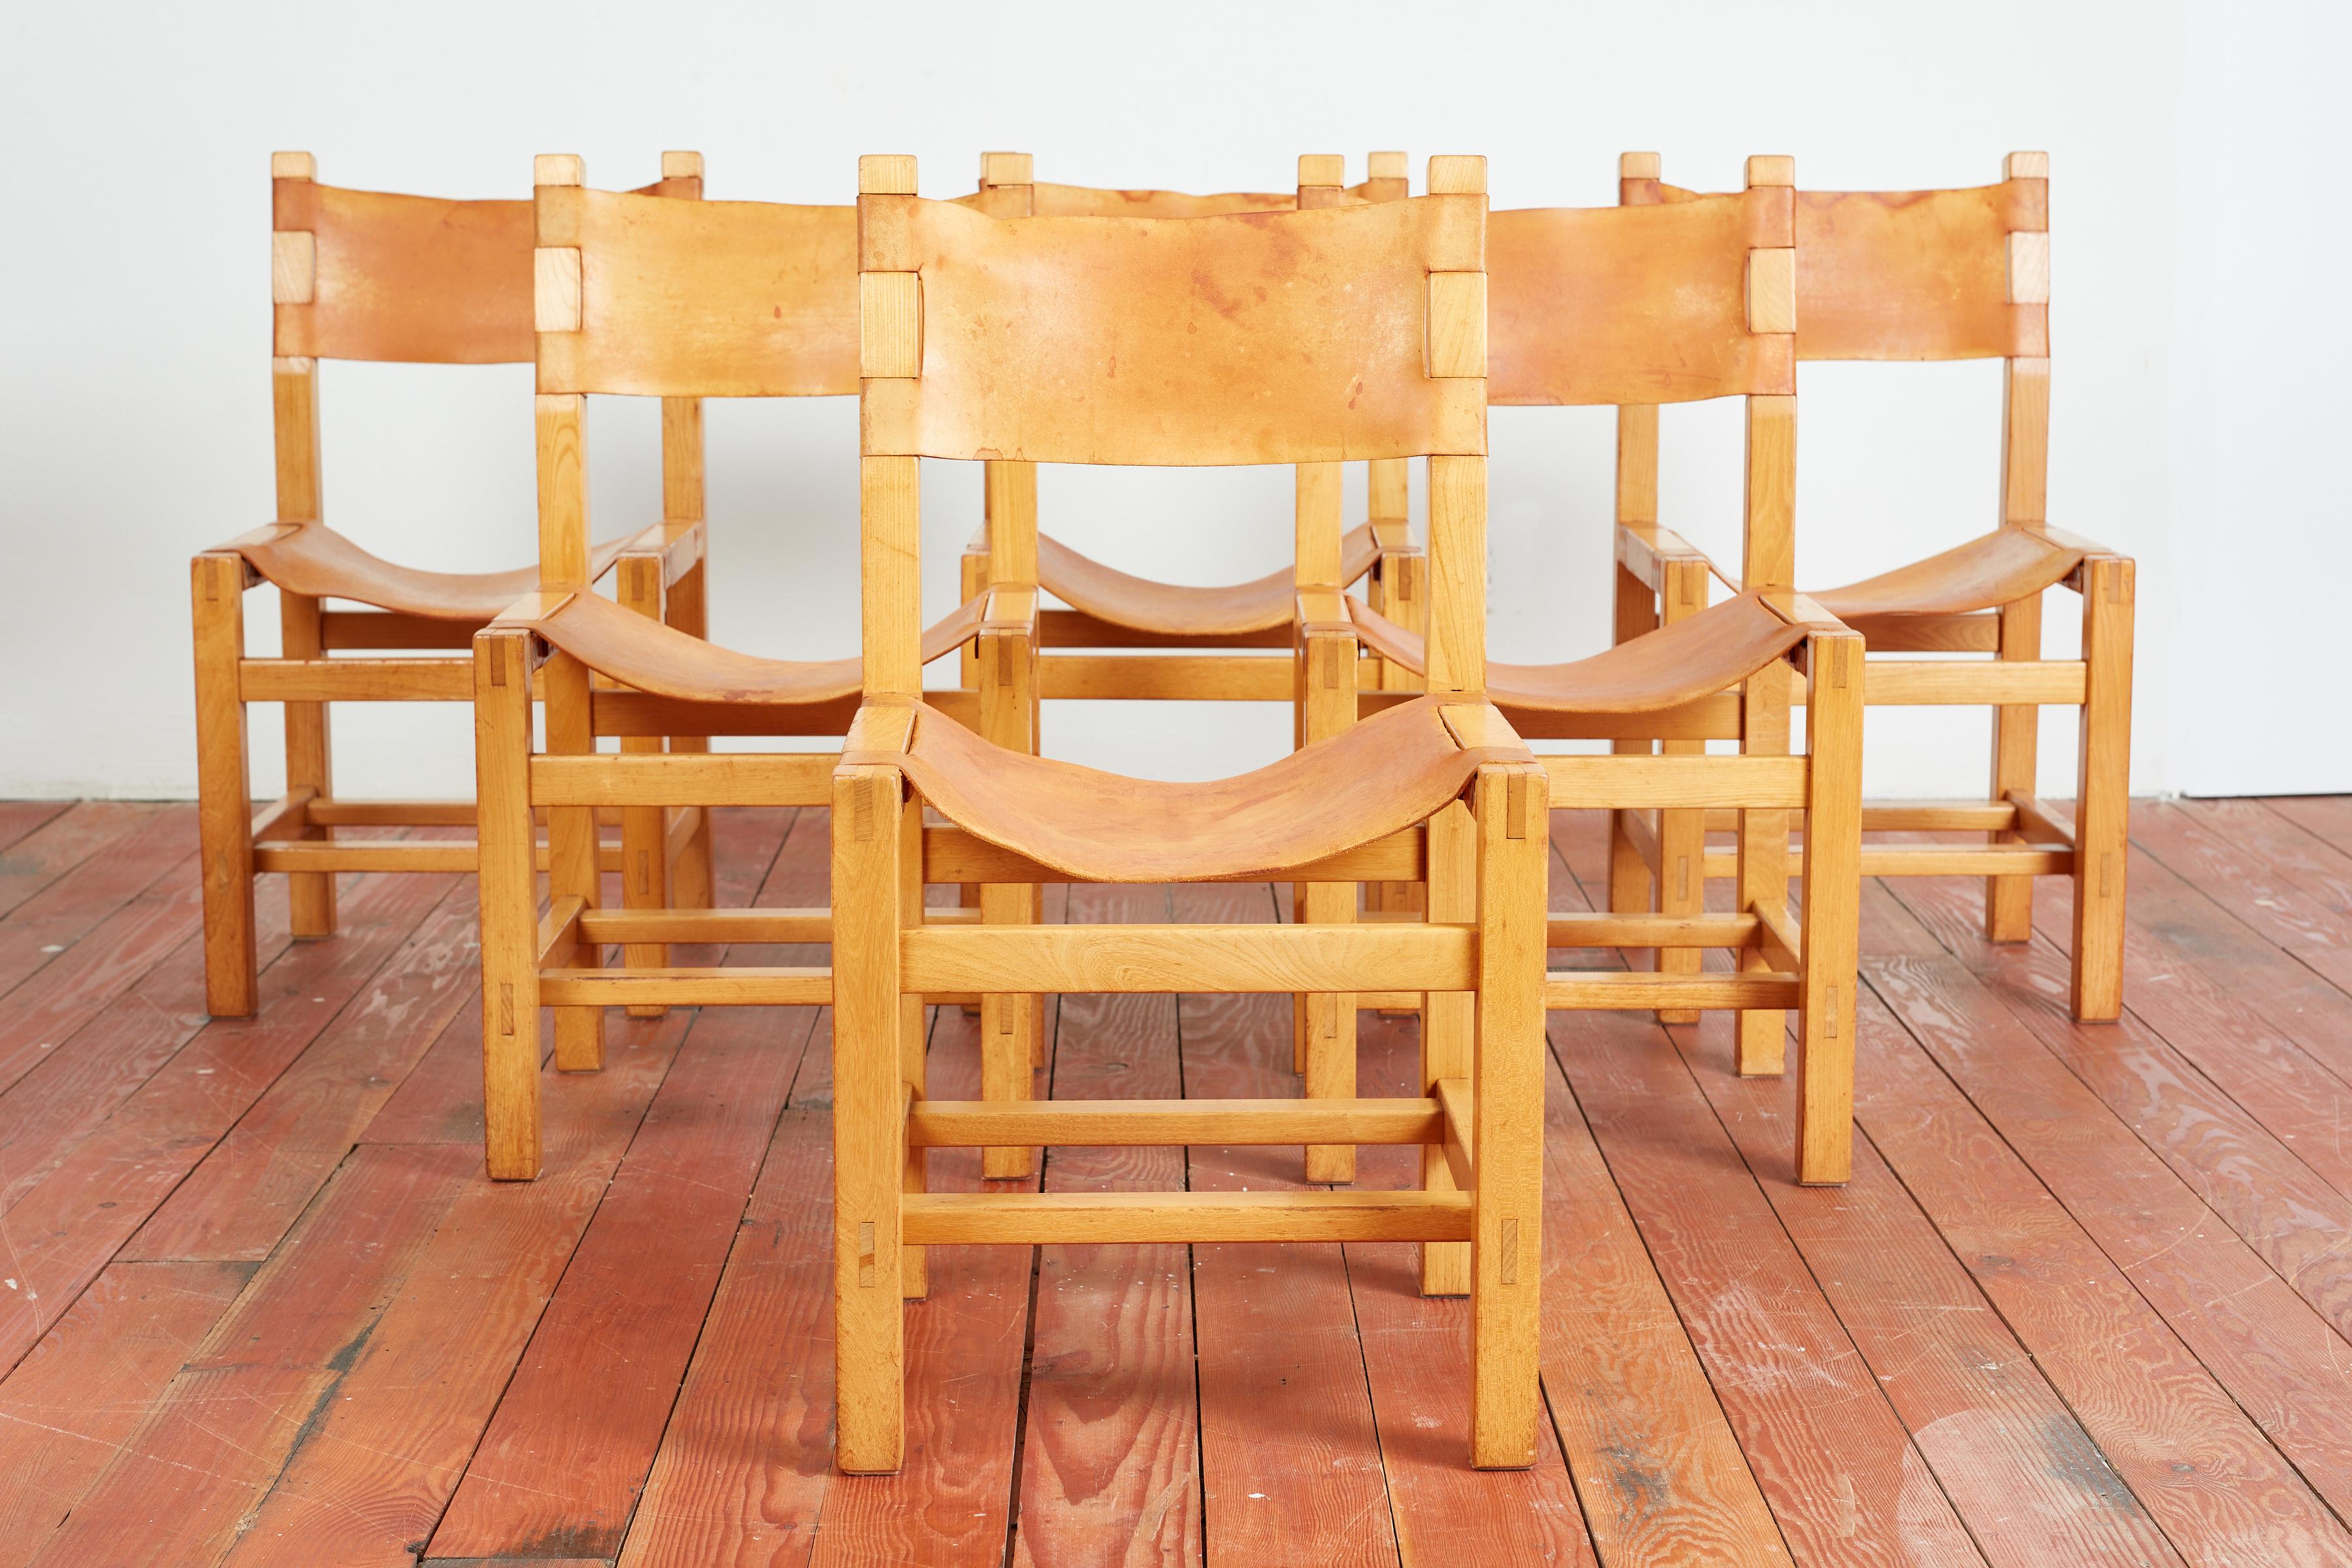 Maison Regain dining chairs  - set of 6 
France, 1960s
Signature leather sling seats and backs with wood frames - great joinery 
In the style of Pierre Chapo with wonderful patina to leather. 
These chairs nice detailing of metal hardware on the